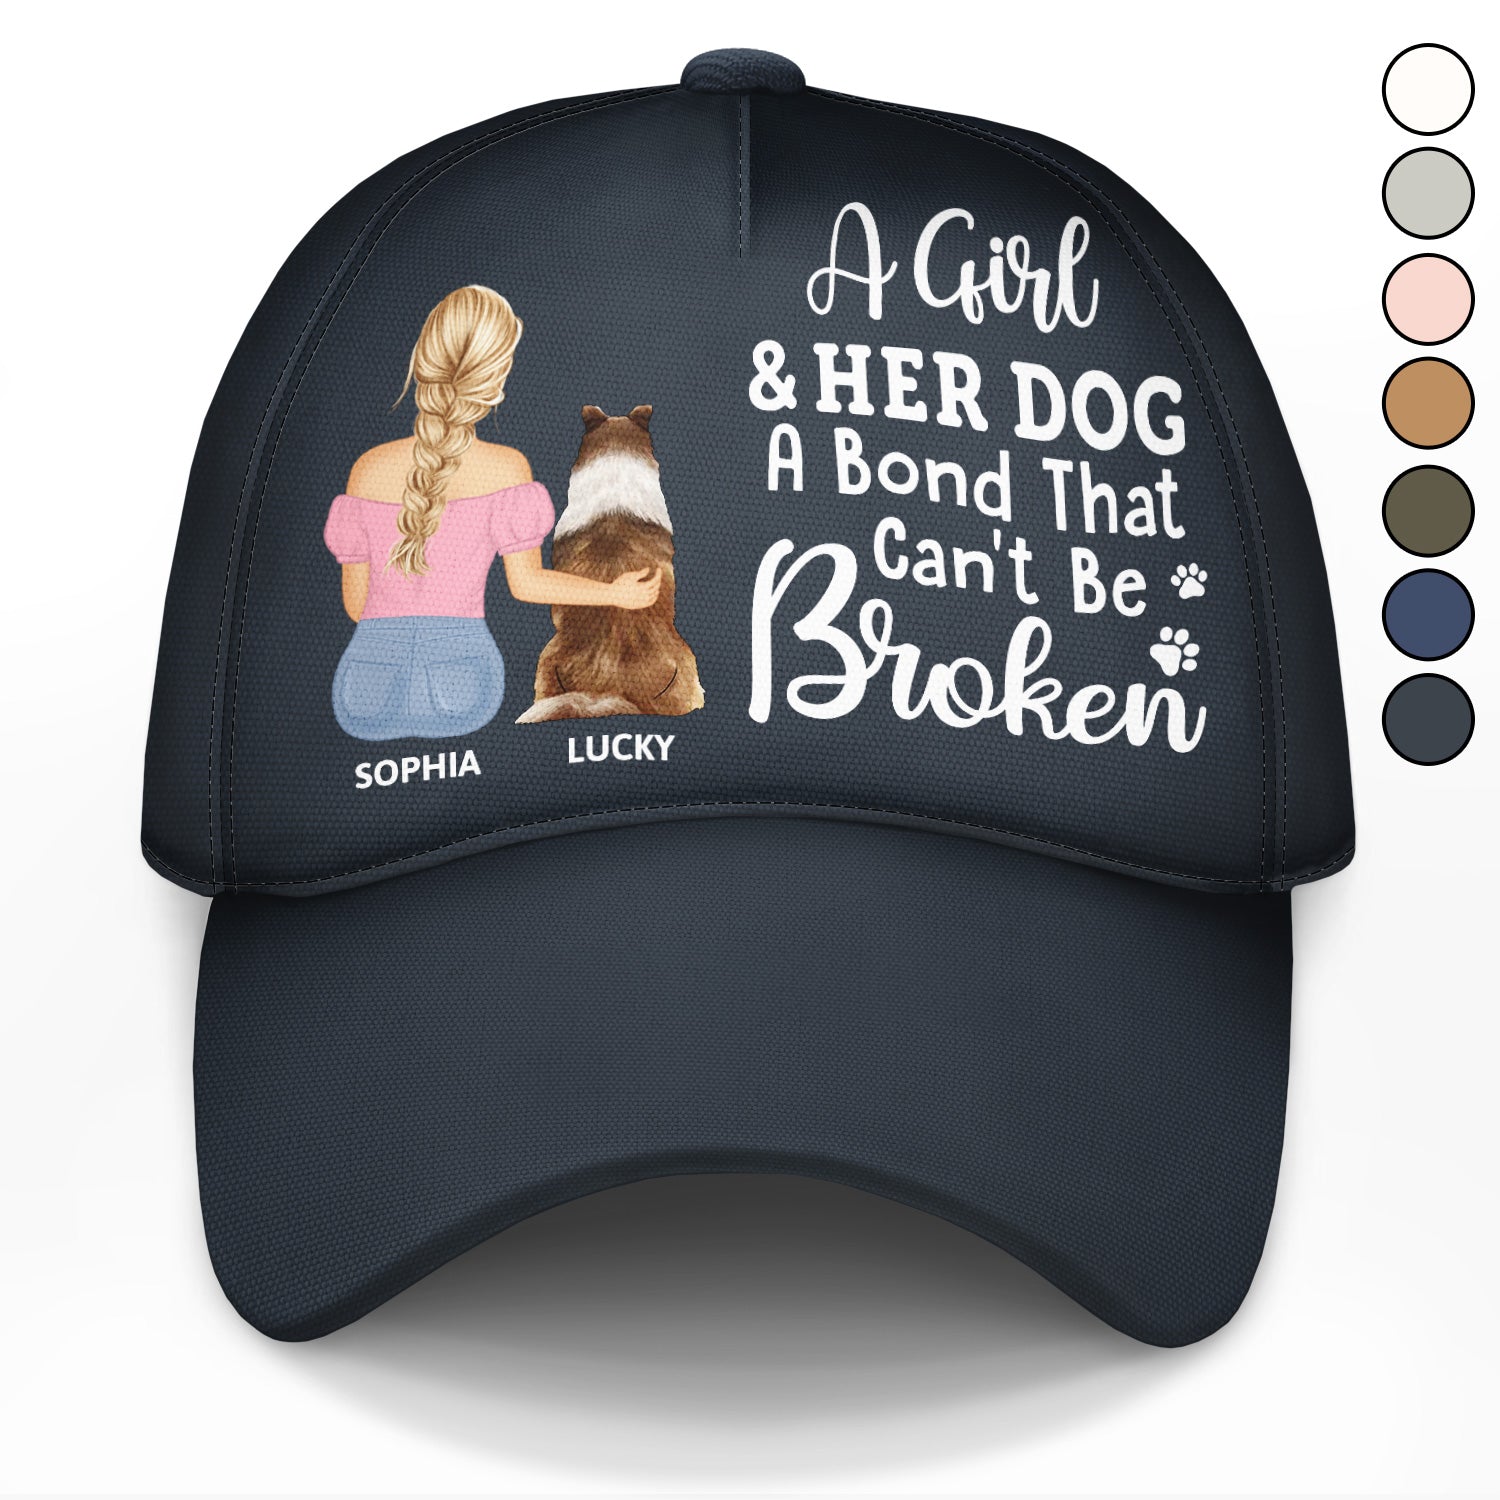 A Bond That Can't Be Broken - Gift For Dog Lovers, Dog Mom, Dog Dad - Personalized Classic Cap